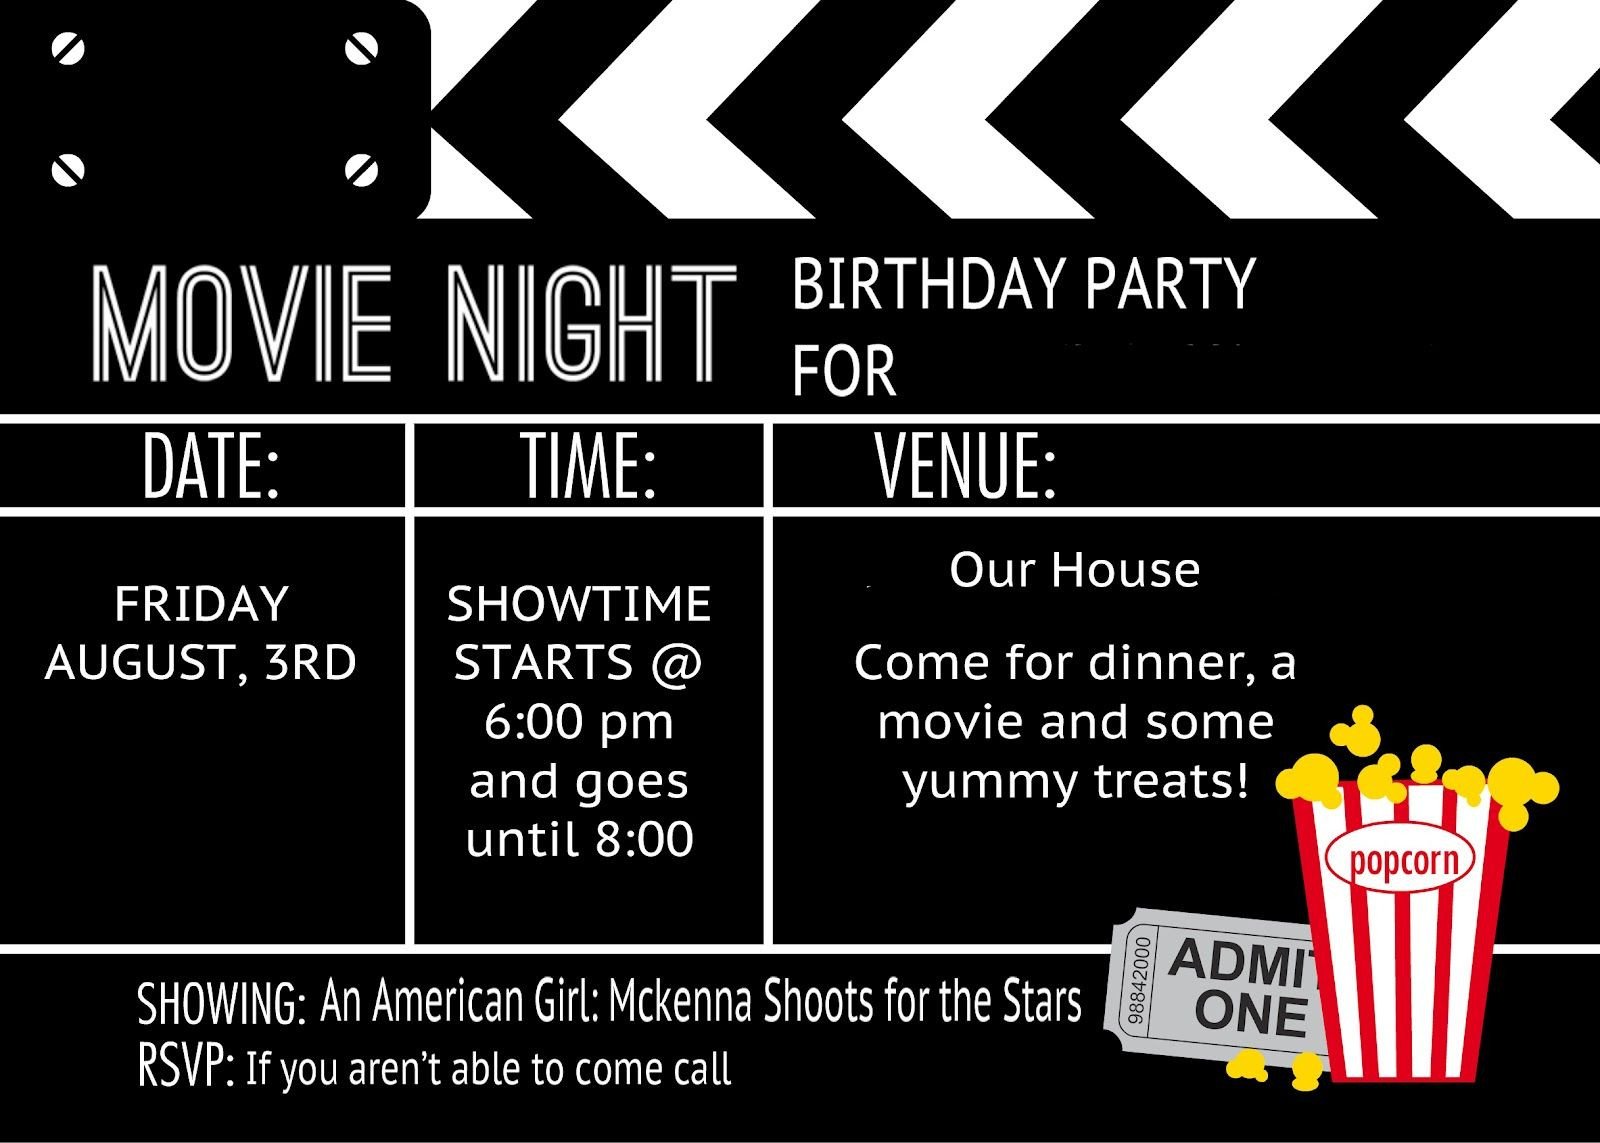 Cool Black and White Movie Themed Birthday Party